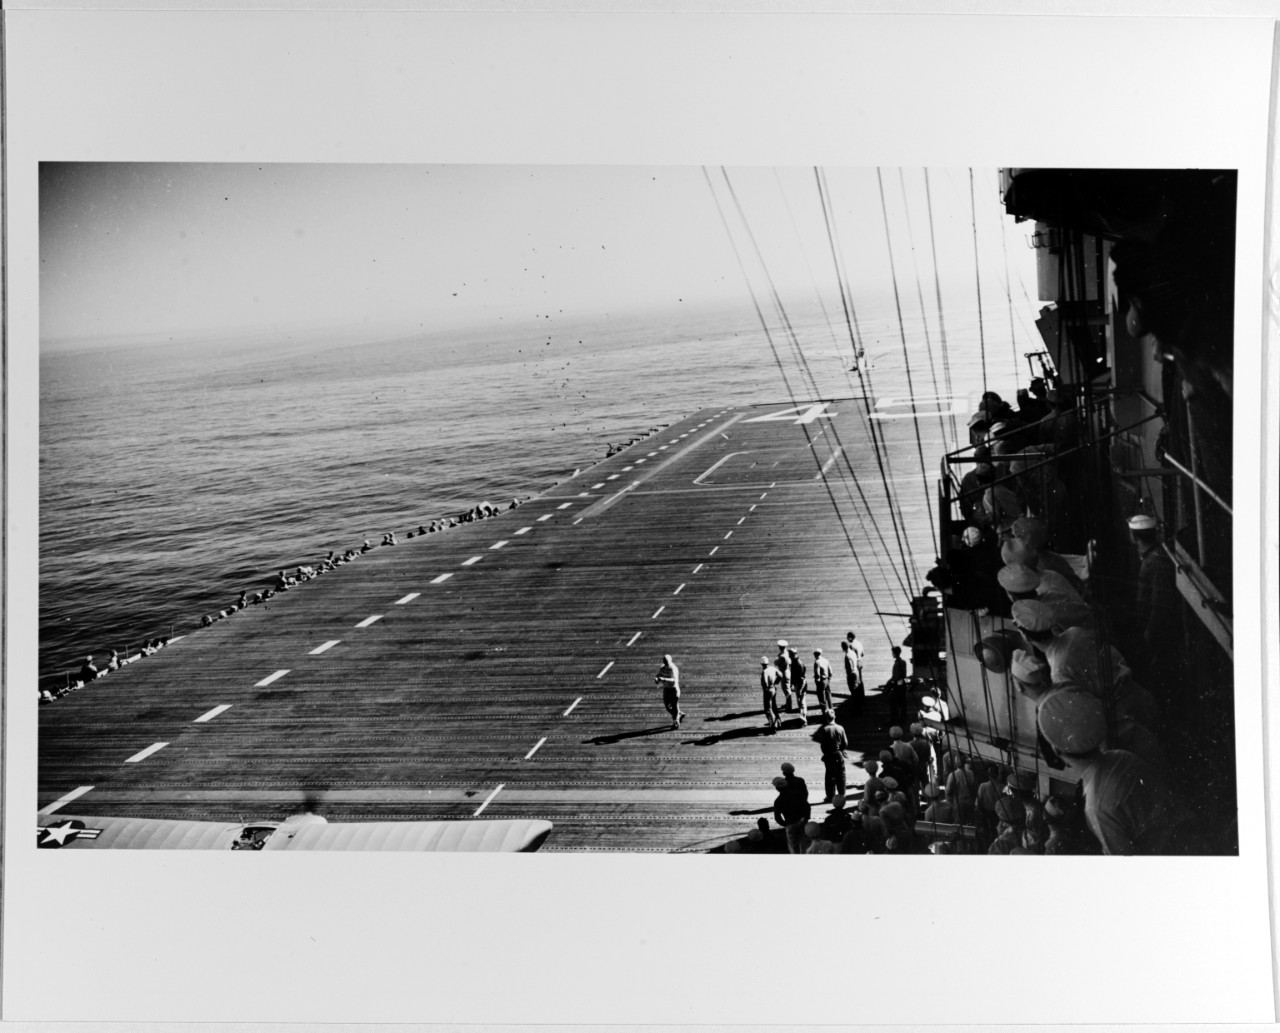 Photo #: NH 70275  USS Valley Forge (CV-45)